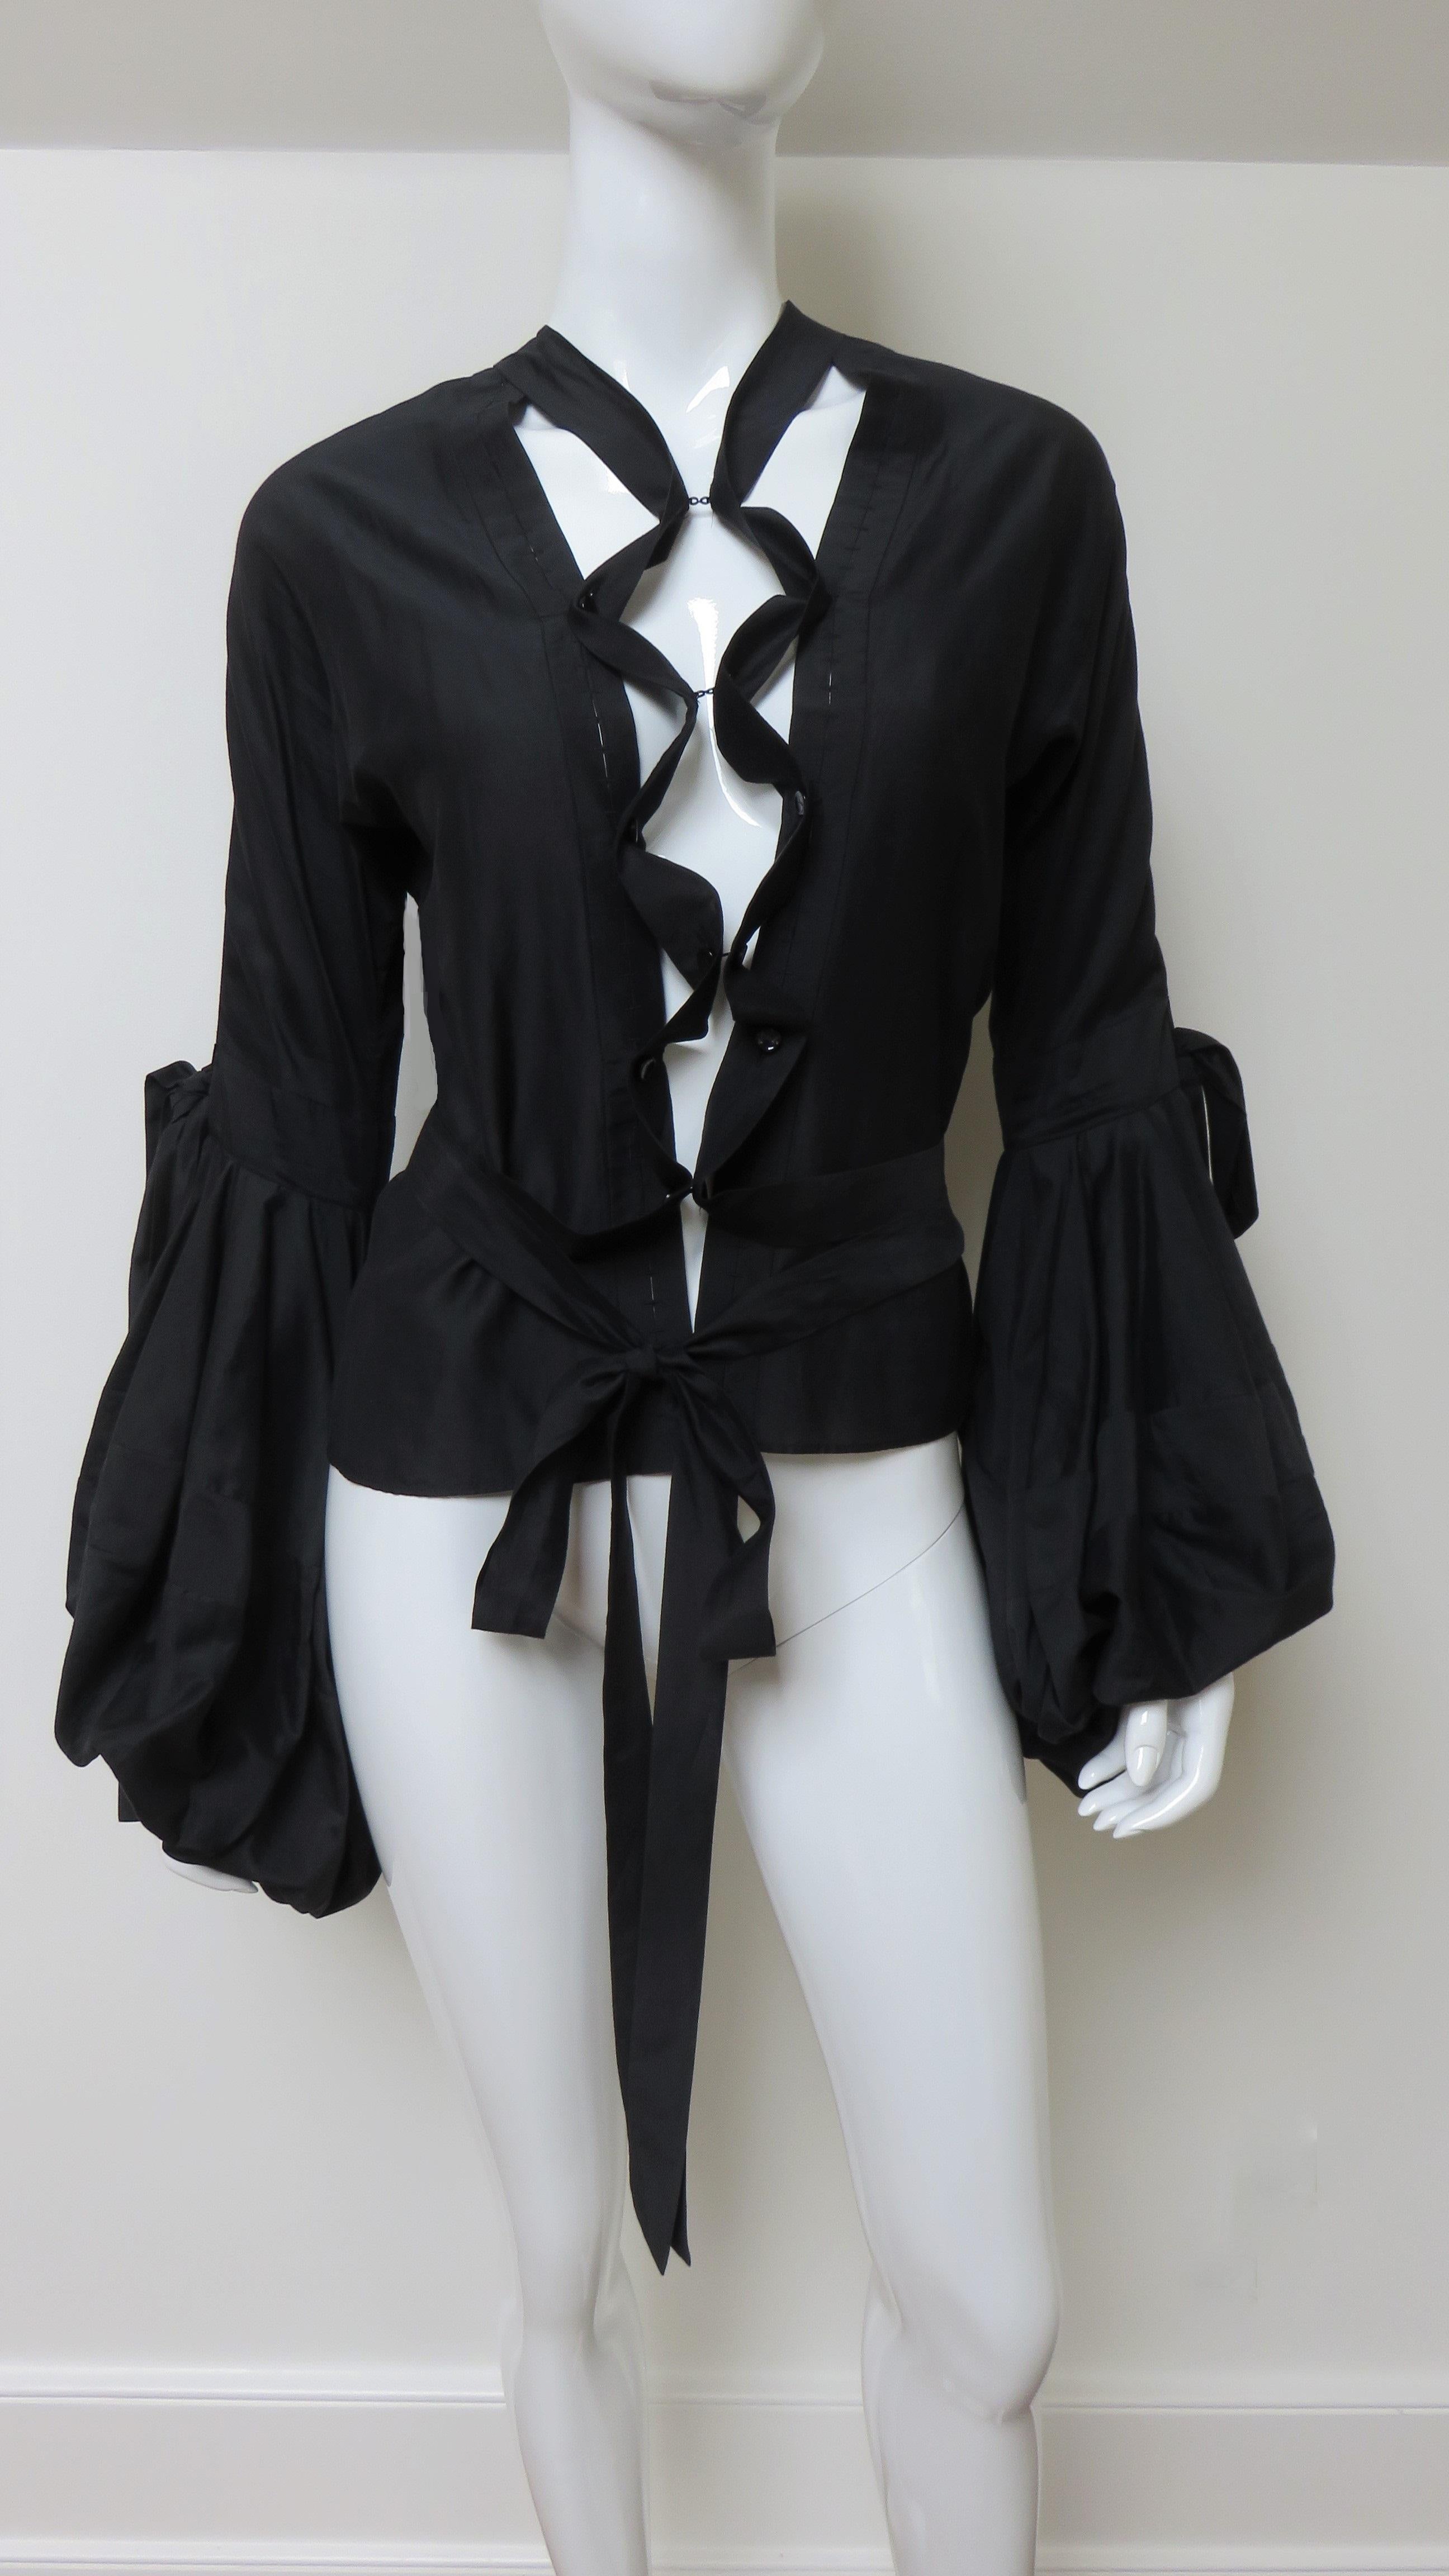 Tom Ford for Yves Saint Laurent Lace up Blouse F/W 2002 1